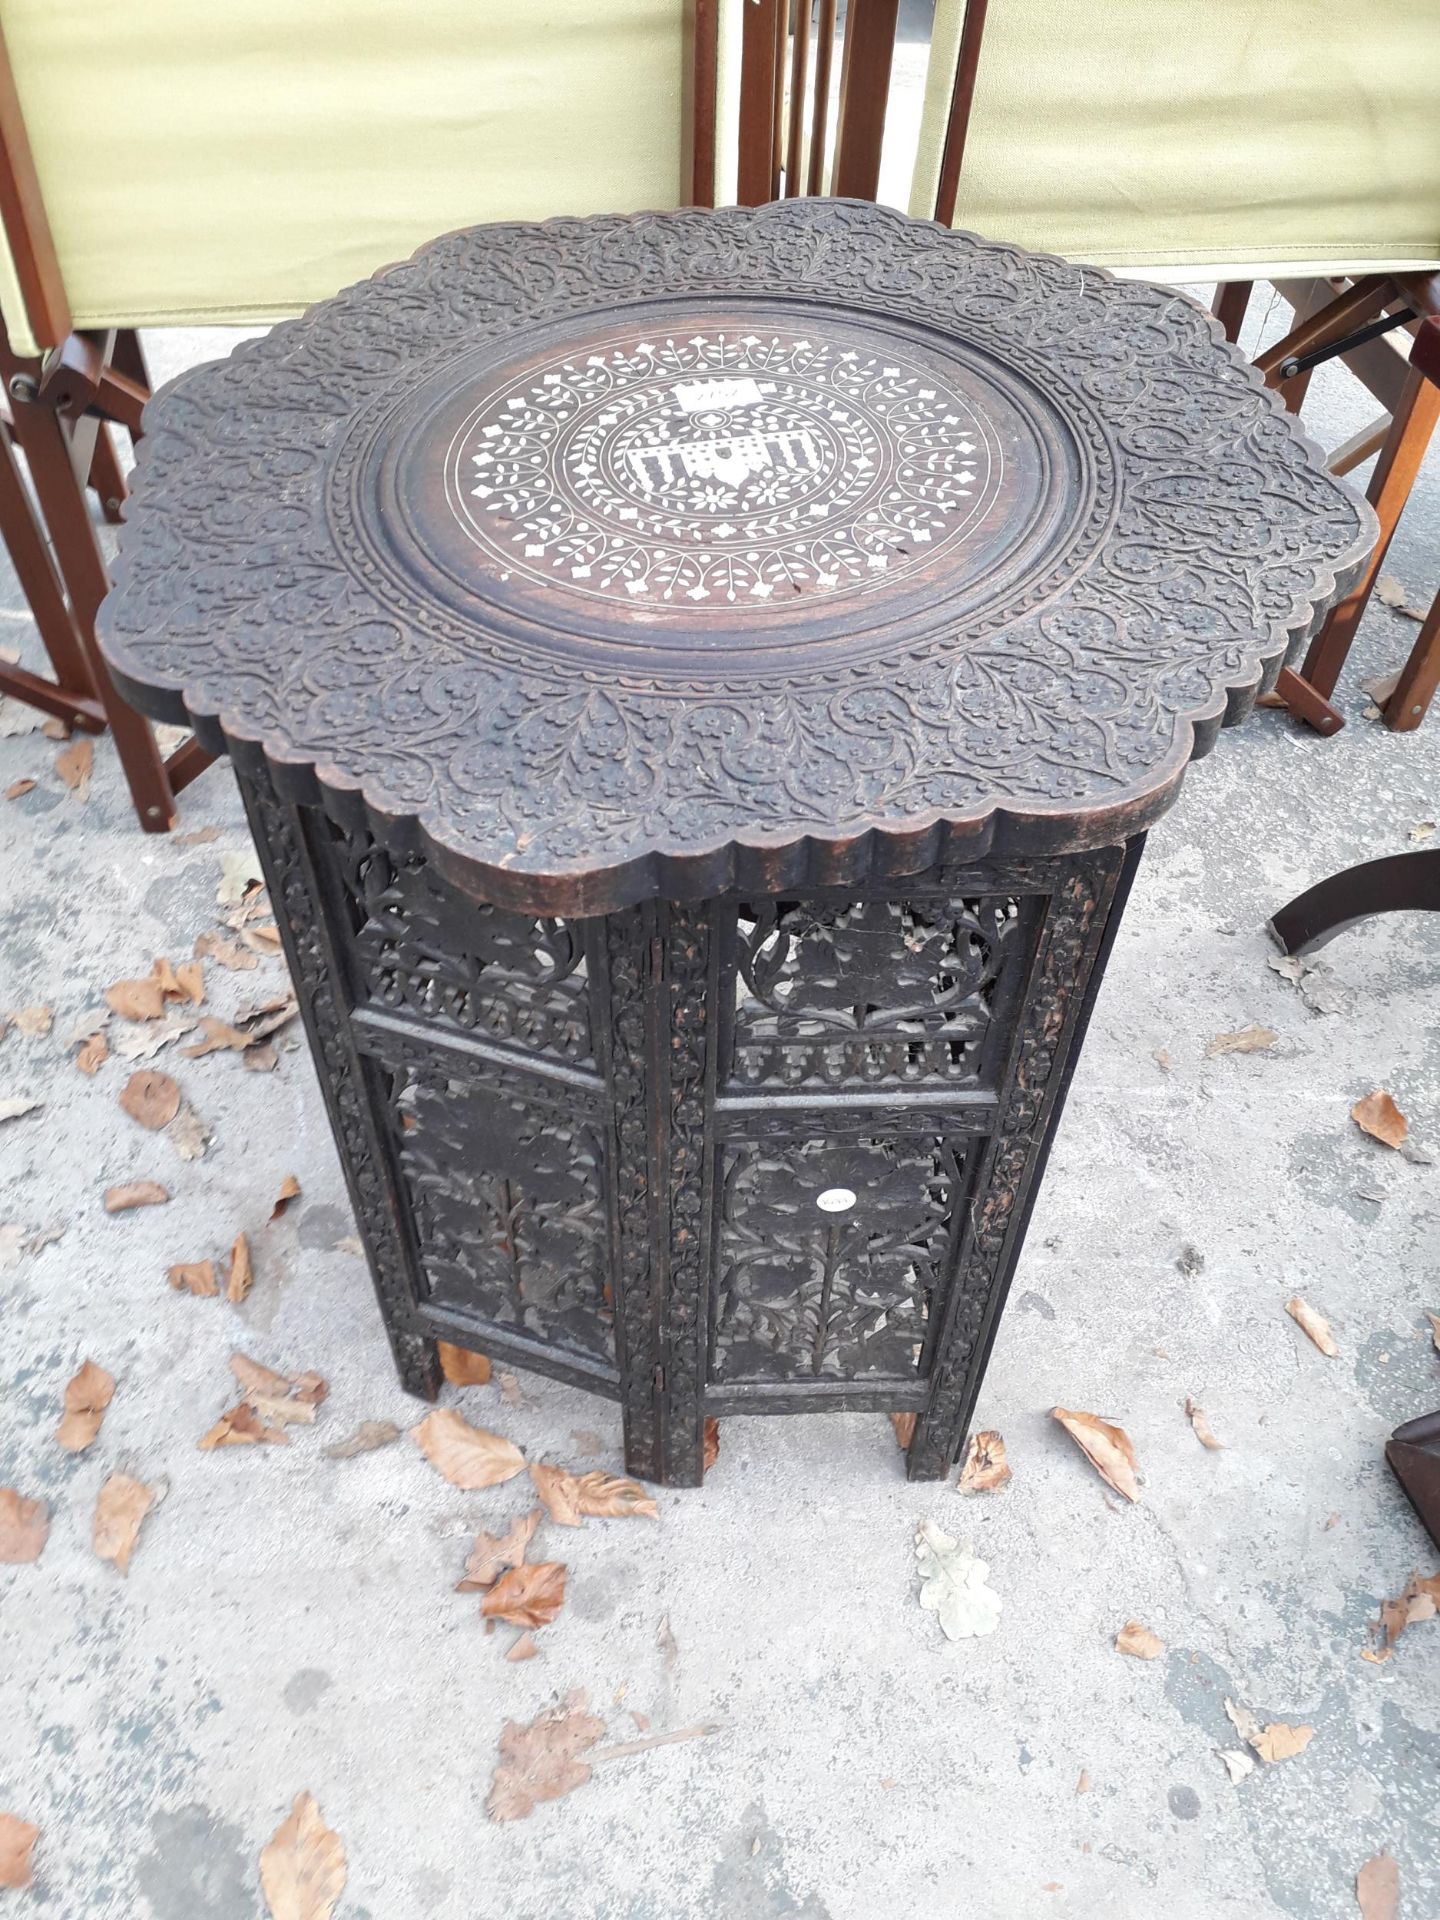 A CARVED INDIAN HARDWOOD TABLE, 22" DIAMETER, WITH FOLDING BASE, FOLIATE CARVING AND INLAY FEATURING